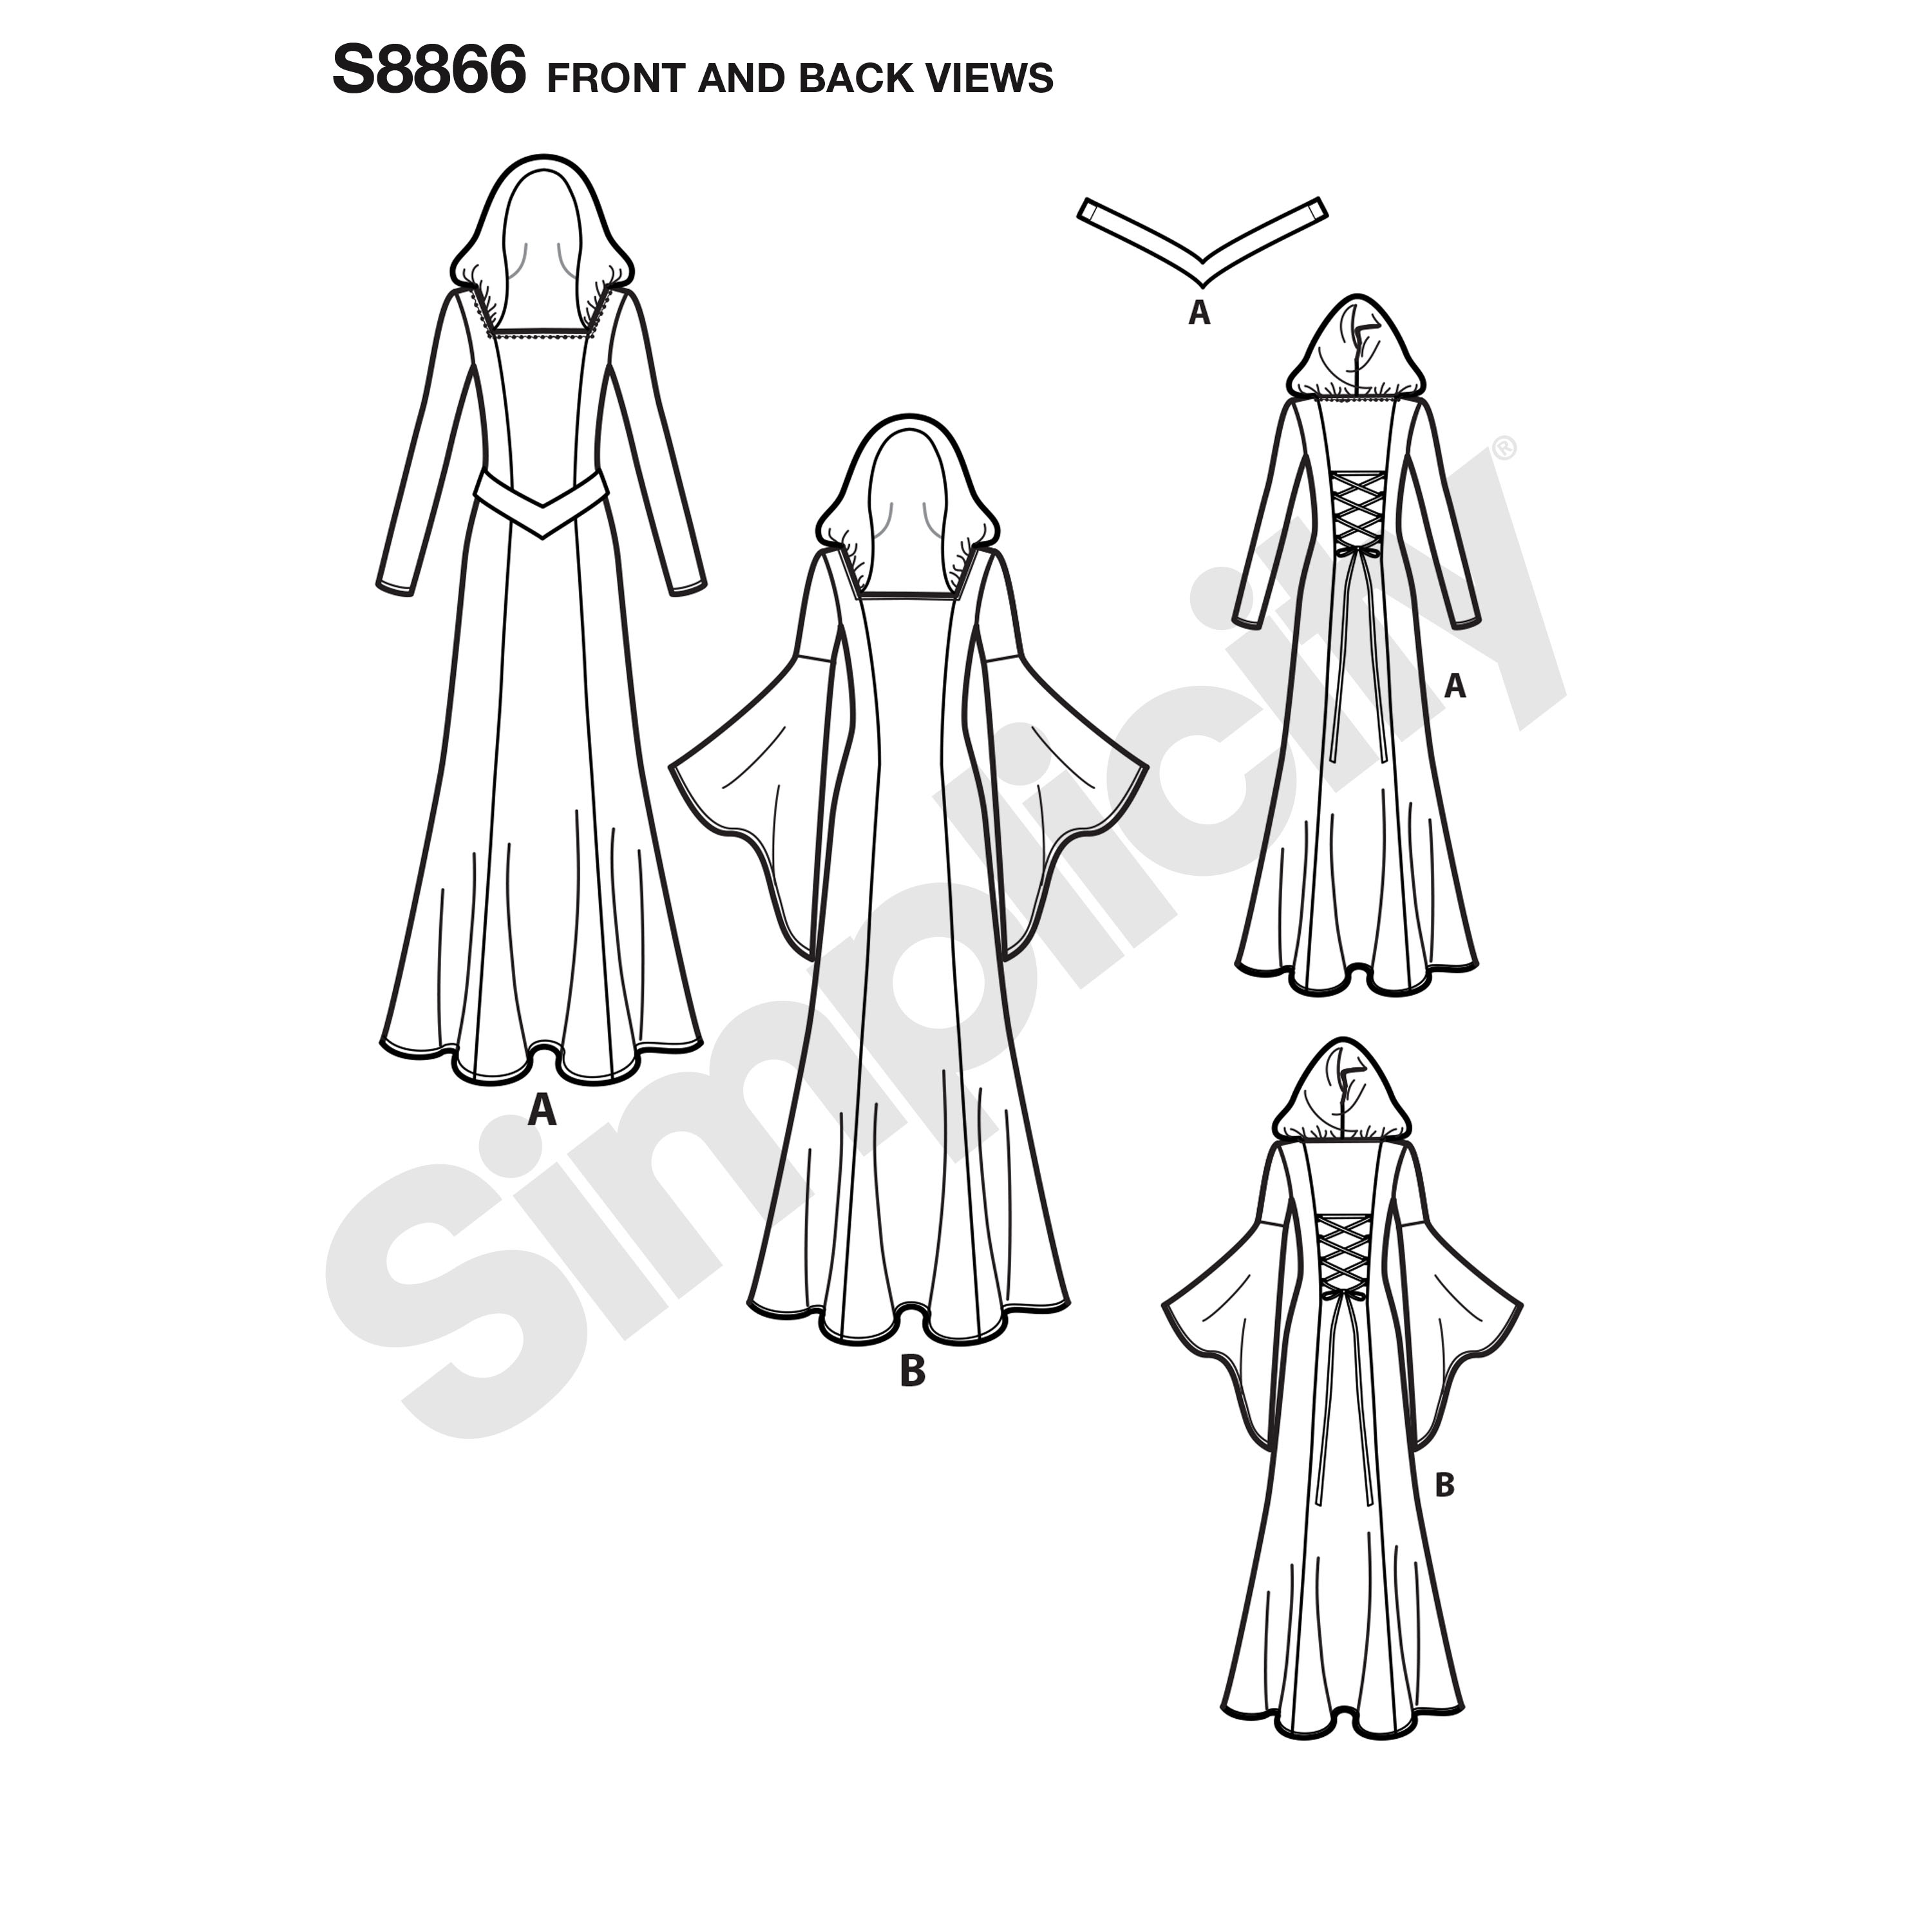 Clothing pattern 14-22 Costume pattern Sizes 6-14 or # S8866 H5/R5 Simplicity Dress patterns 8866 You pick Simplicity patterns